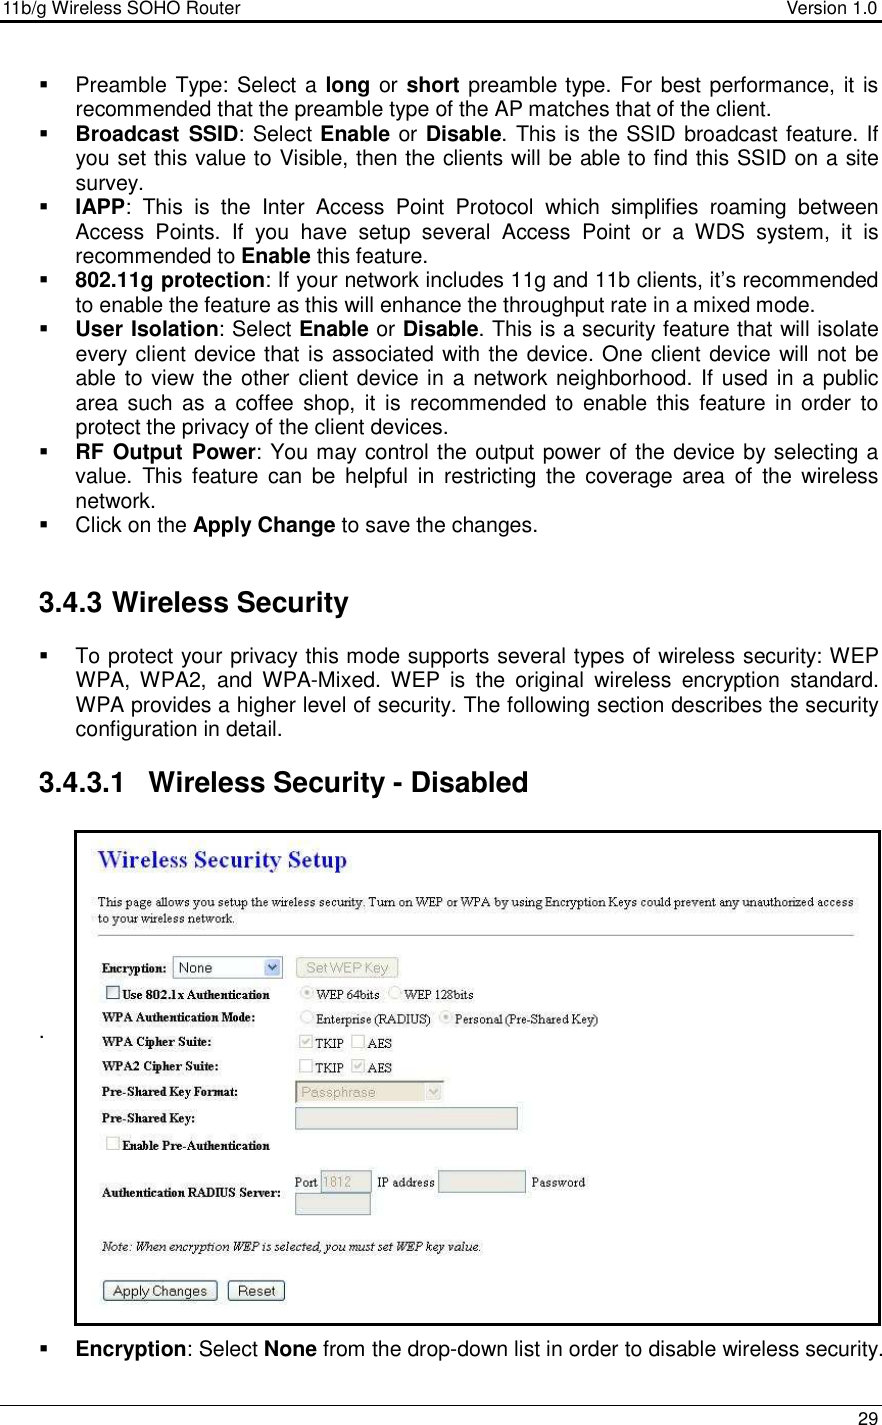 11b/g Wireless SOHO Router                                     Version 1.0    29    Preamble Type: Select a long or short preamble type. For best performance, it is recommended that the preamble type of the AP matches that of the client.   Broadcast SSID: Select Enable or Disable. This is the SSID broadcast feature. If you set this value to Visible, then the clients will be able to find this SSID on a site survey.    IAPP:  This  is  the  Inter  Access  Point  Protocol  which  simplifies  roaming  between Access  Points.  If  you  have  setup  several  Access  Point  or  a  WDS  system,  it  is recommended to Enable this feature.    802.11g protection: If your network includes 11g and 11b clients, it’s recommended to enable the feature as this will enhance the throughput rate in a mixed mode.   User Isolation: Select Enable or Disable. This is a security feature that will isolate every client device that is associated with the device. One client device will not be able to view the other client device in a network neighborhood. If used in a public area  such as  a  coffee shop,  it  is  recommended  to  enable  this  feature in  order  to protect the privacy of the client devices.   RF Output Power: You may control the output power of the device by selecting a value.  This  feature  can  be  helpful  in  restricting  the  coverage  area  of  the  wireless network.   Click on the Apply Change to save the changes.    3.4.3 Wireless Security    To protect your privacy this mode supports several types of wireless security: WEP WPA,  WPA2,  and  WPA-Mixed.  WEP  is  the  original  wireless  encryption  standard. WPA provides a higher level of security. The following section describes the security configuration in detail.   3.4.3.1  Wireless Security - Disabled         .               Encryption: Select None from the drop-down list in order to disable wireless security.   